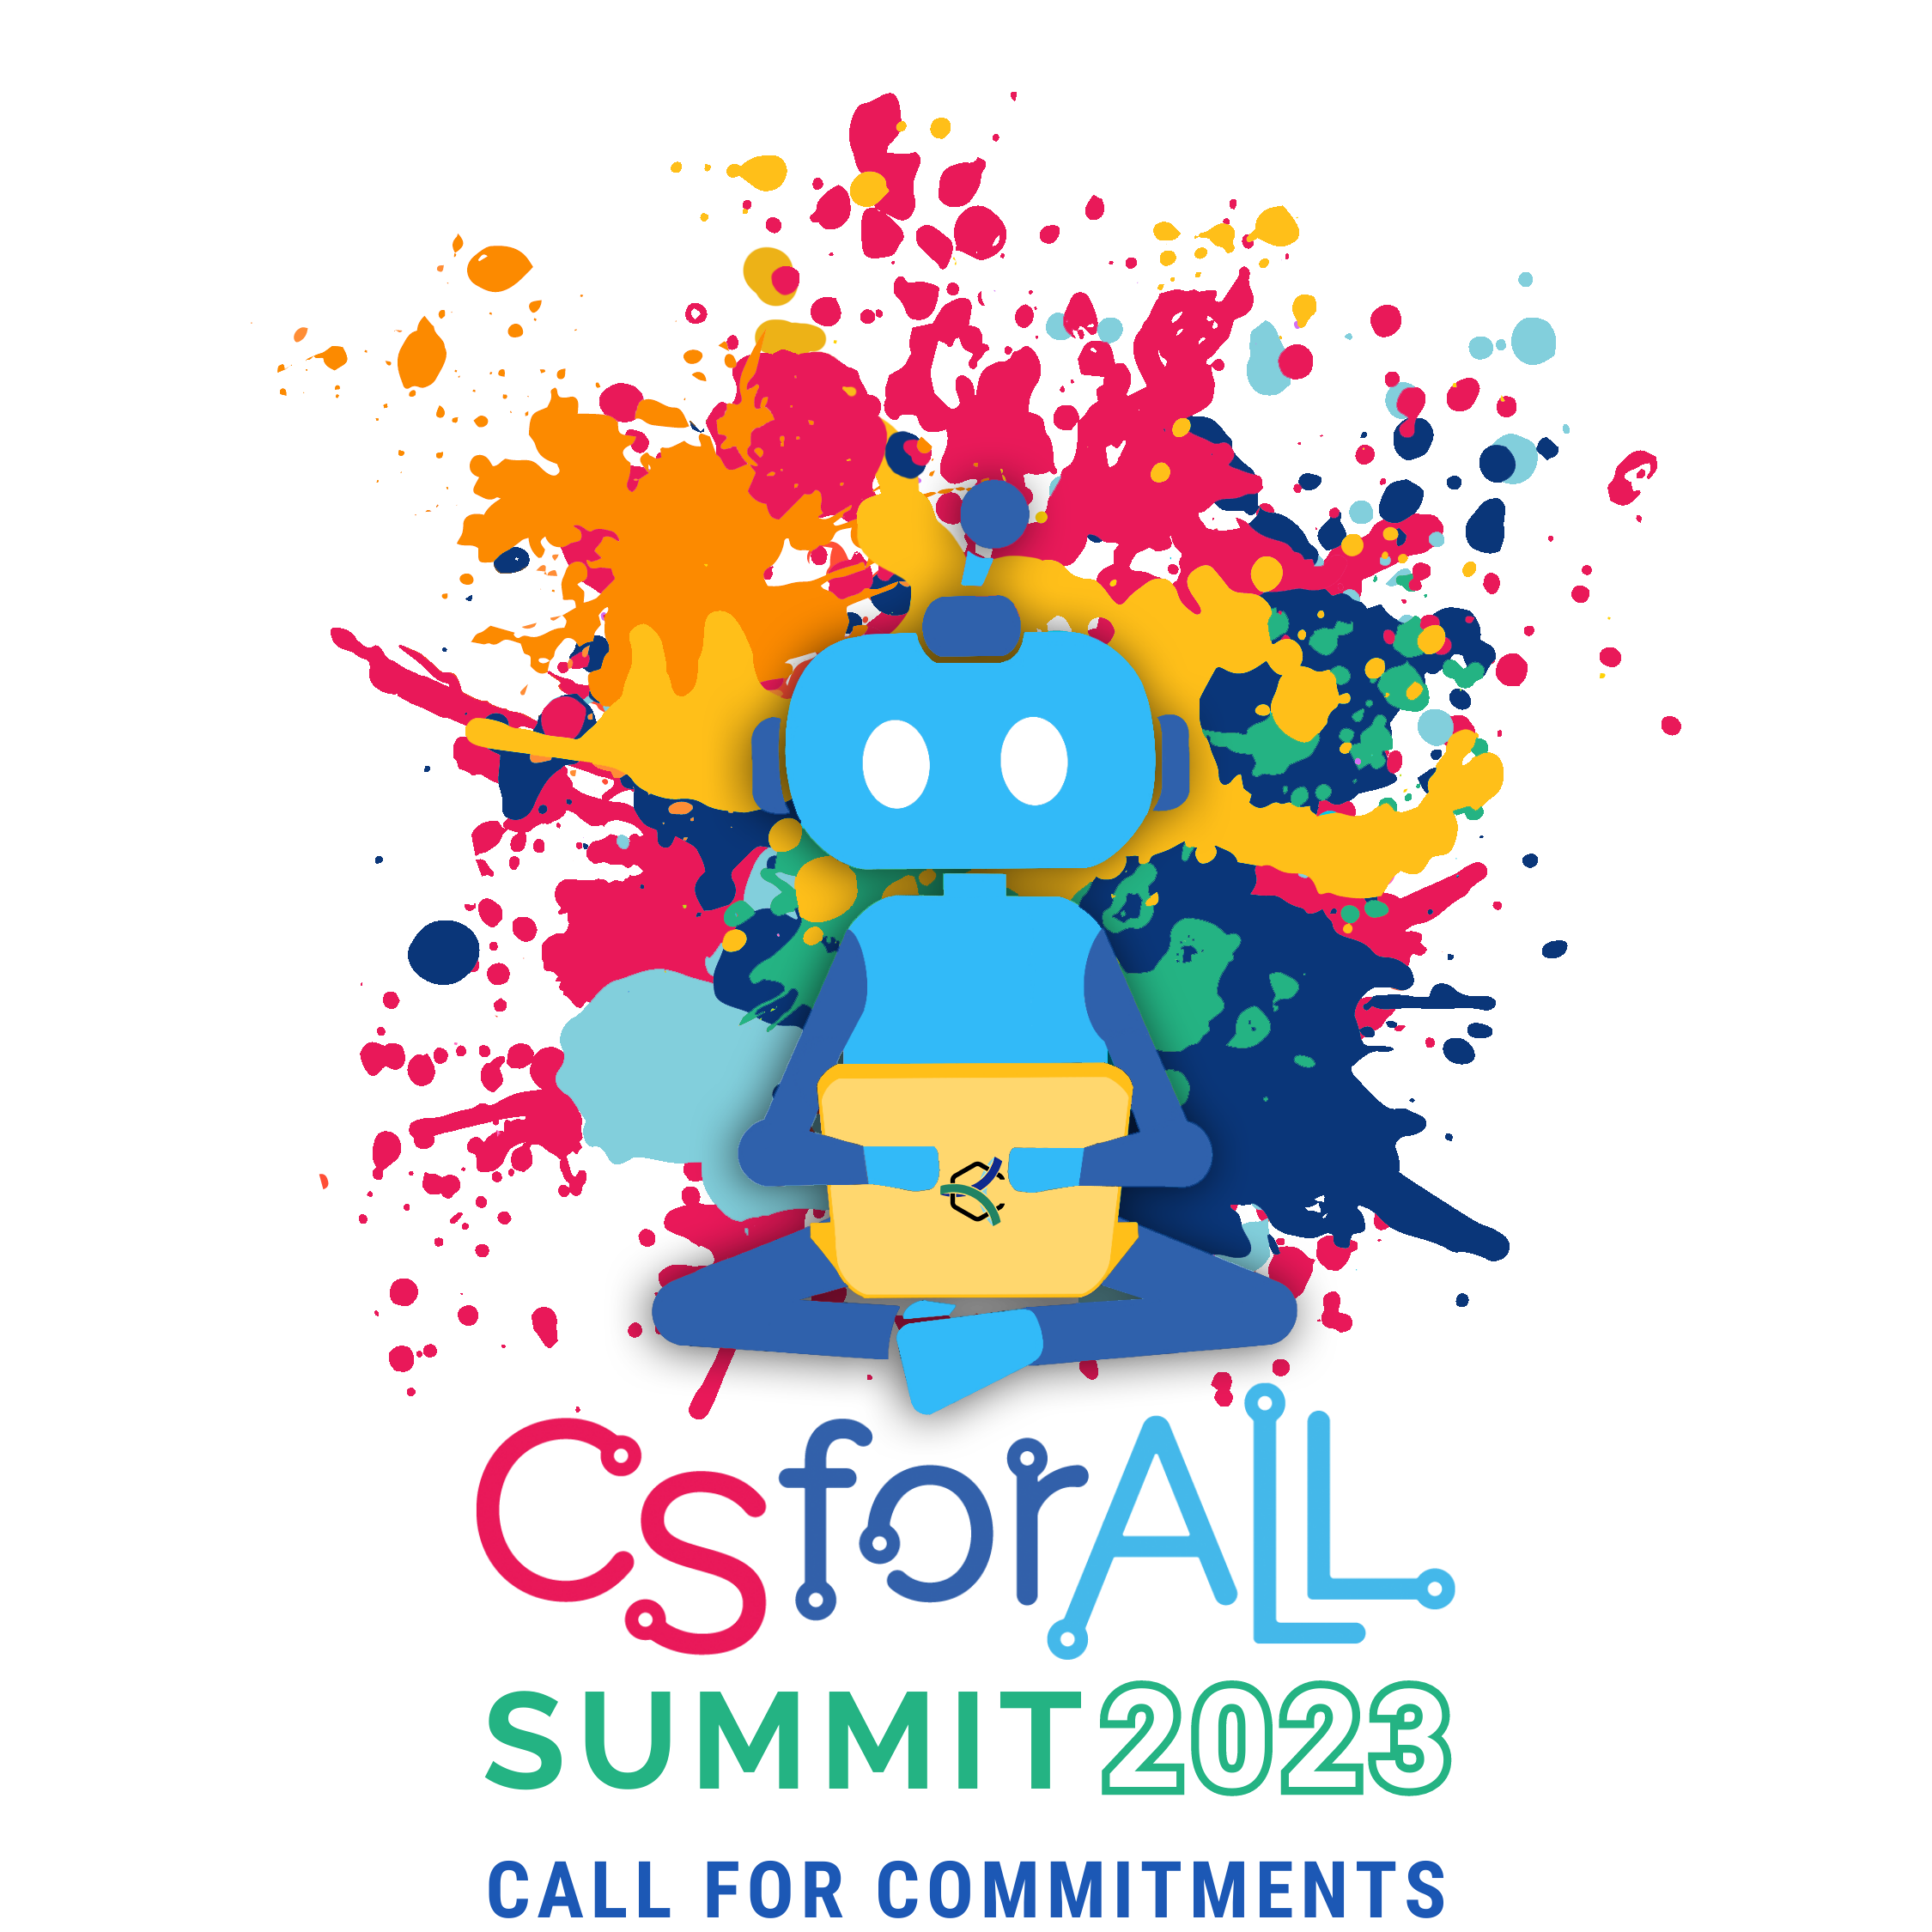 CSforALL Call for Commitments